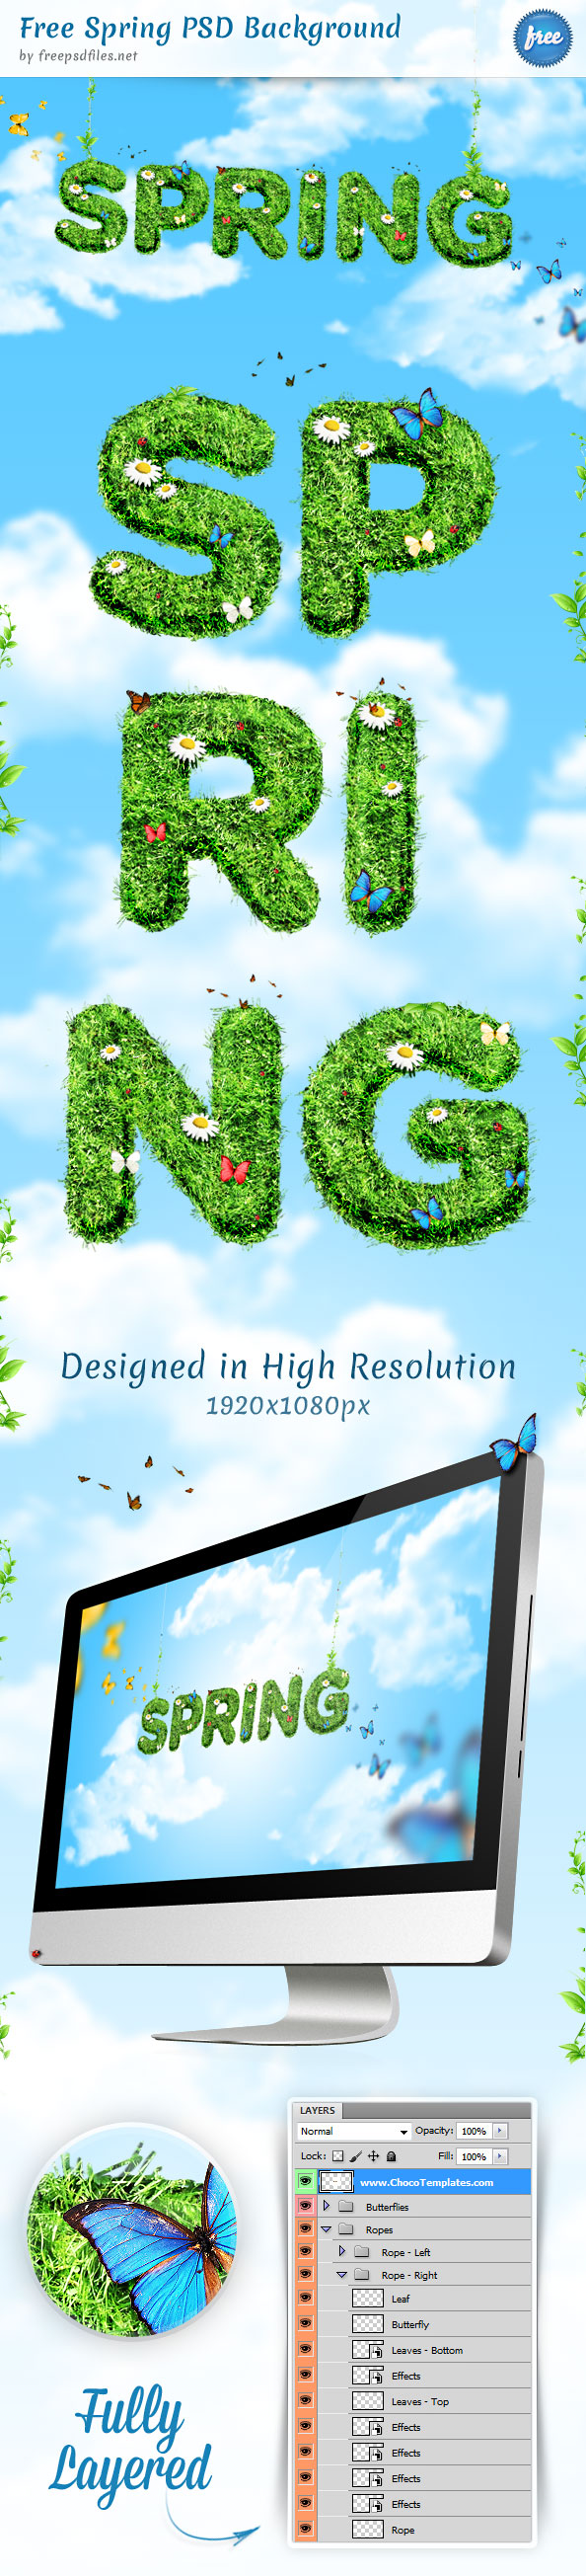 Free Spring Background PSD File